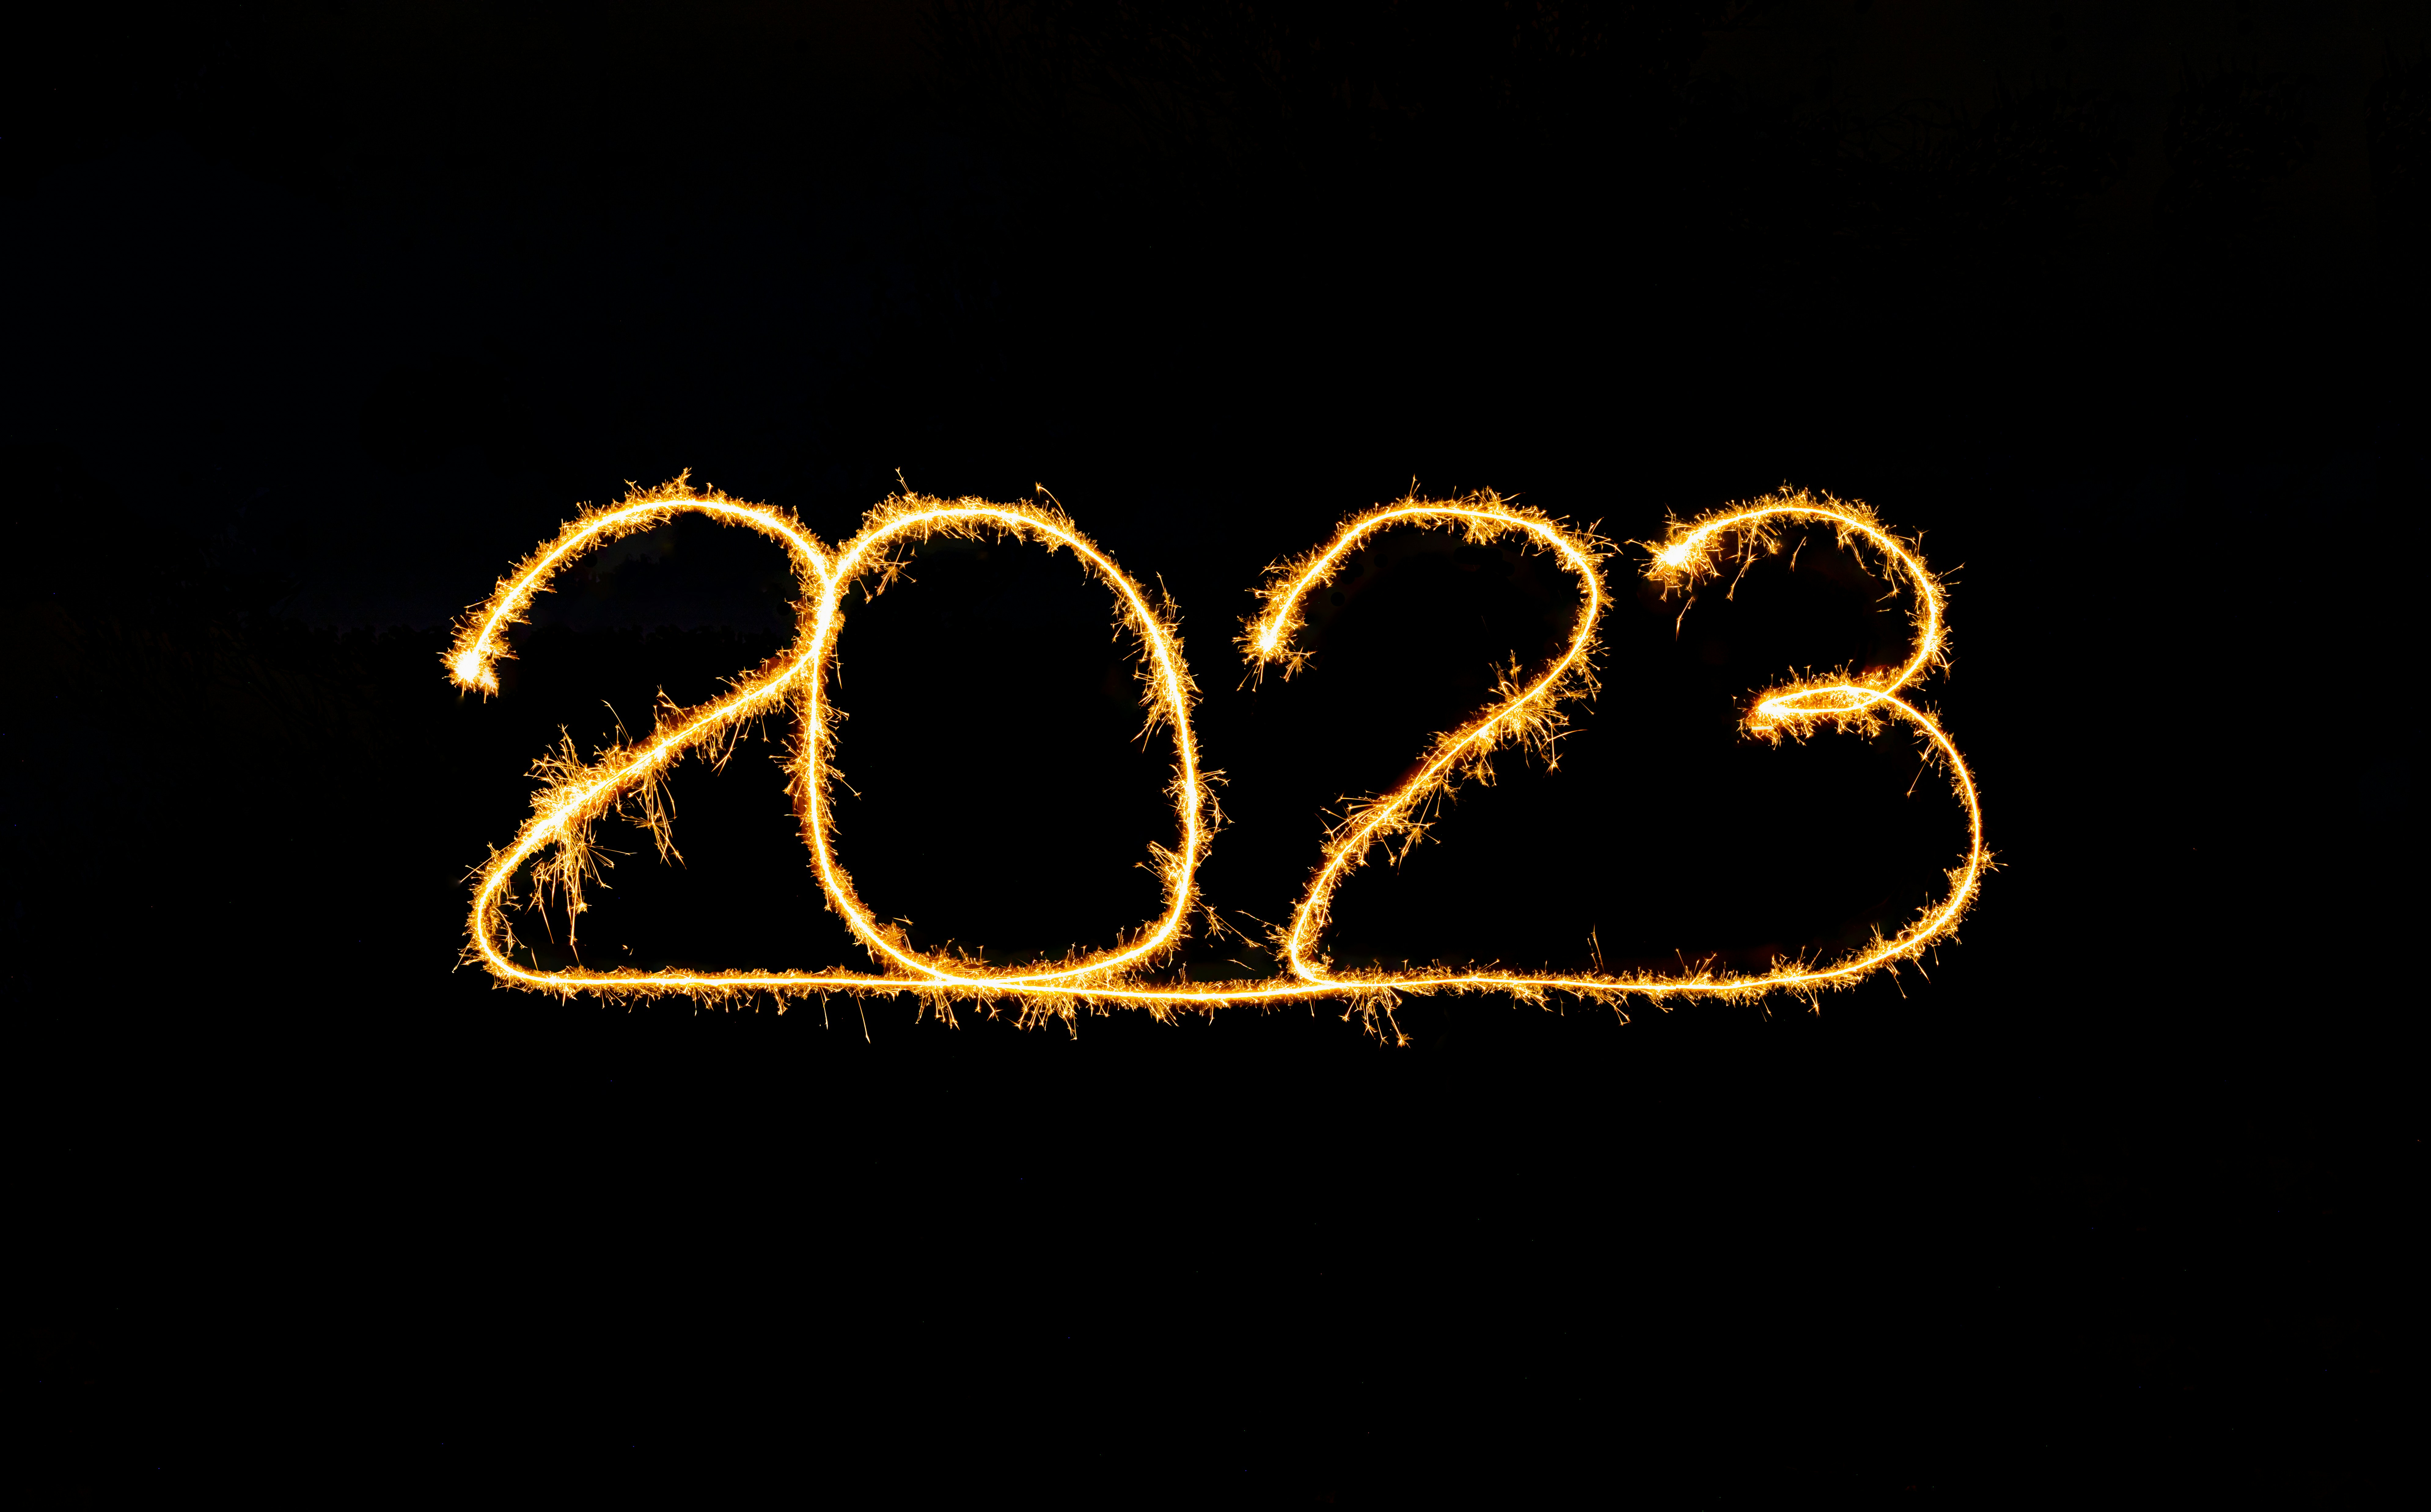 2023 lightpainted with sparklers, happy new year, 2023 banner for website, background for greeting cards, greetings